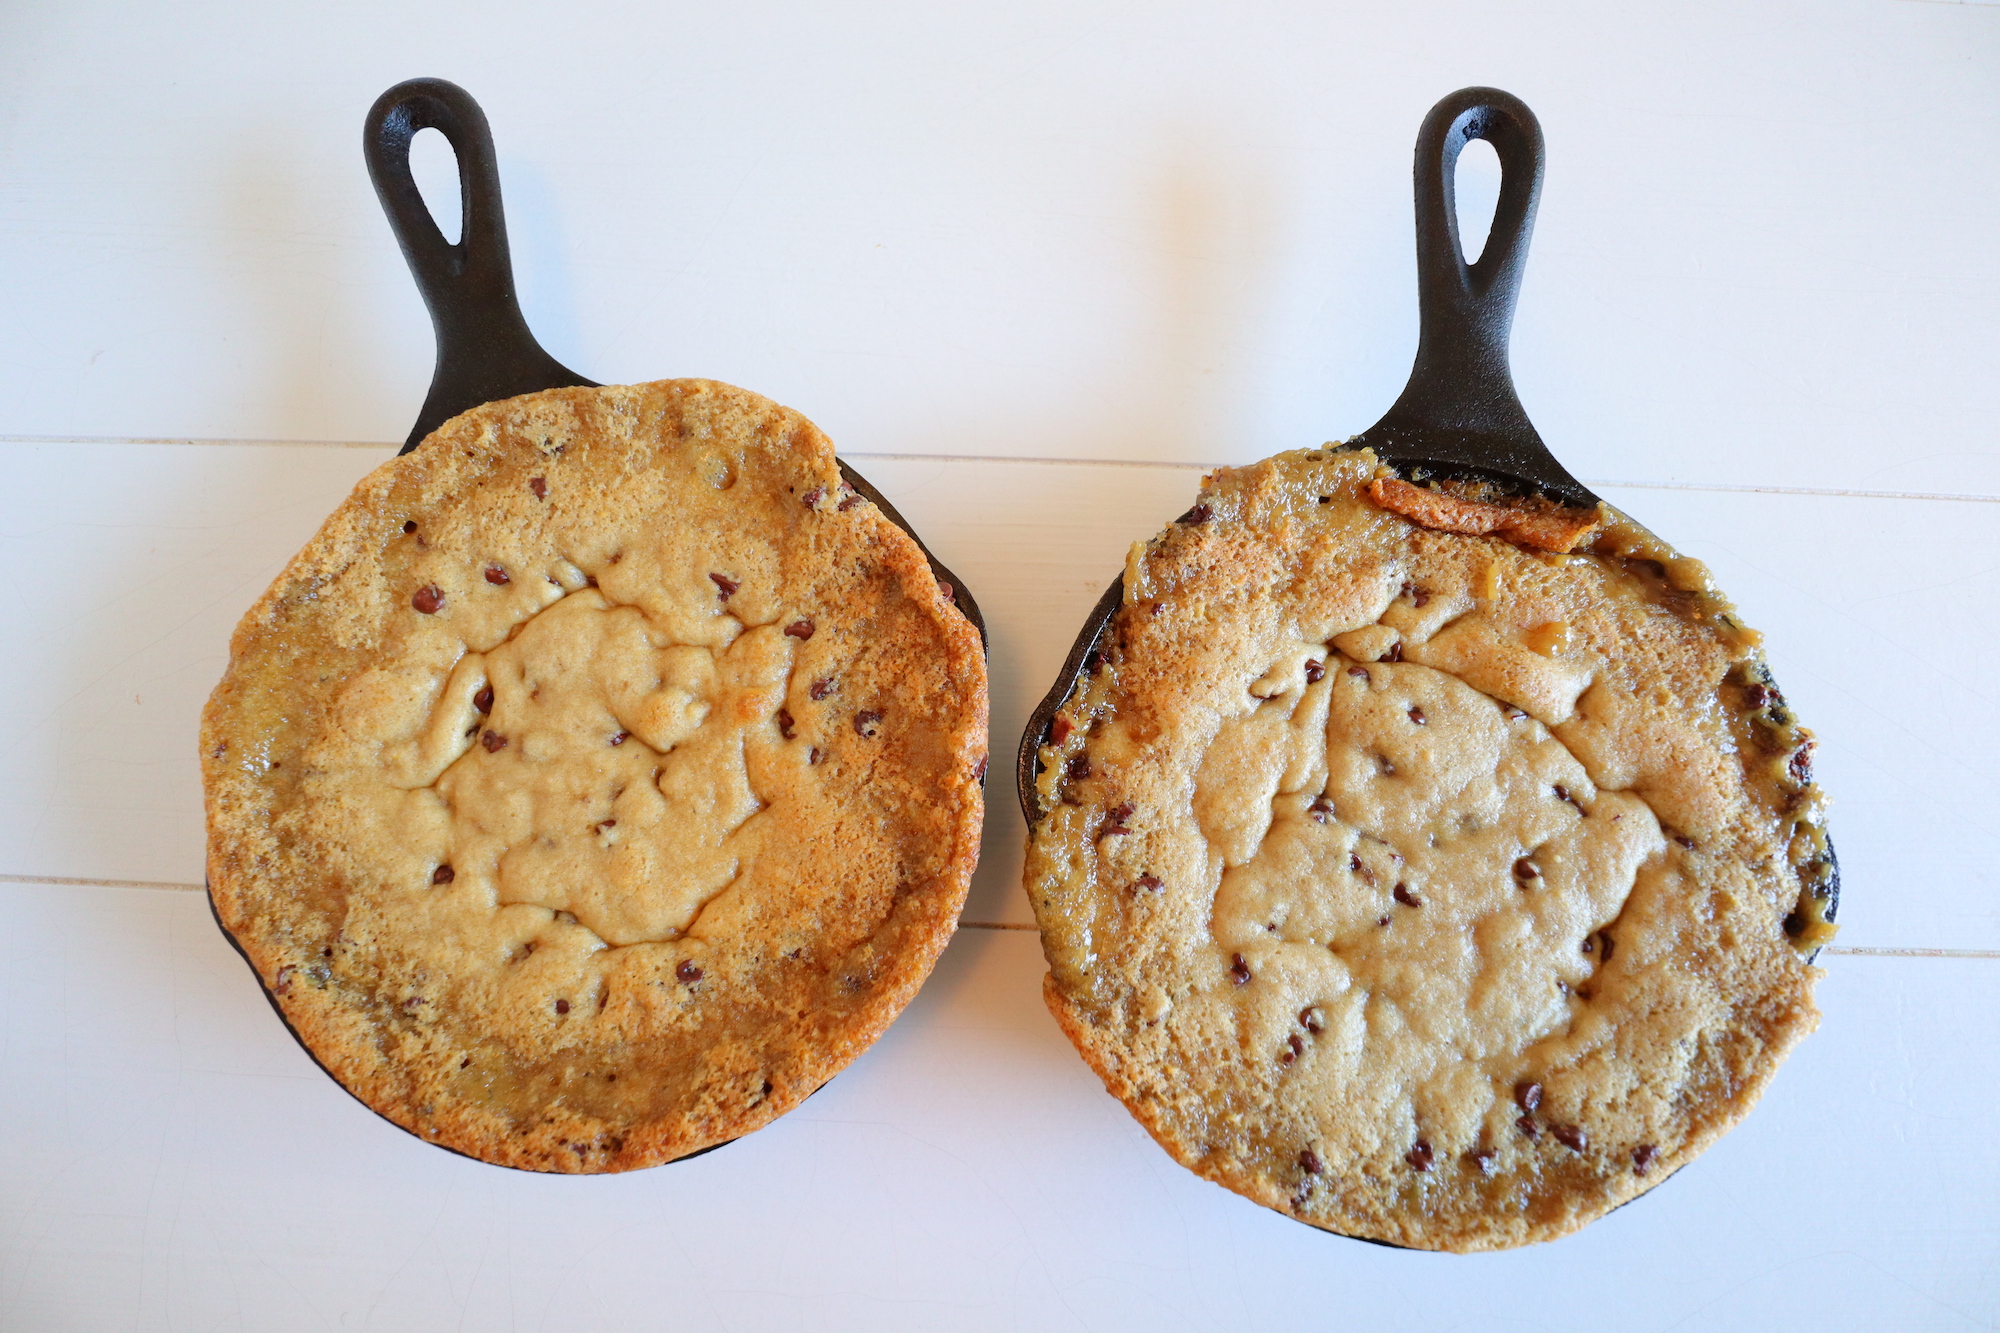 Pizookie (chocolate chip cookie in a skillet) Recipe - Home and Kind